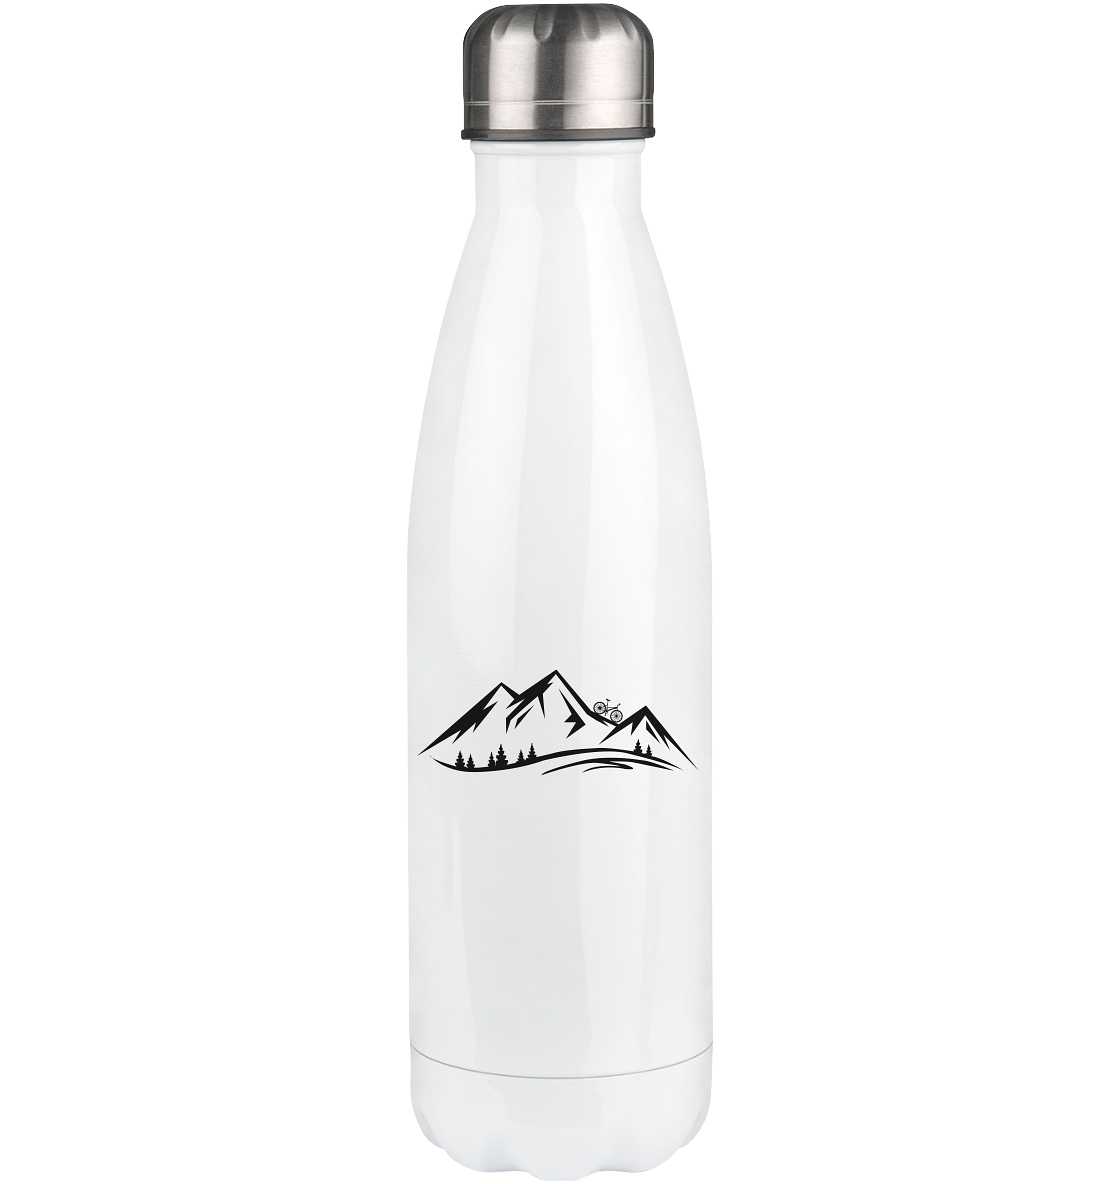 Mountain and Bicycle - Edelstahl Thermosflasche fahrrad 500ml